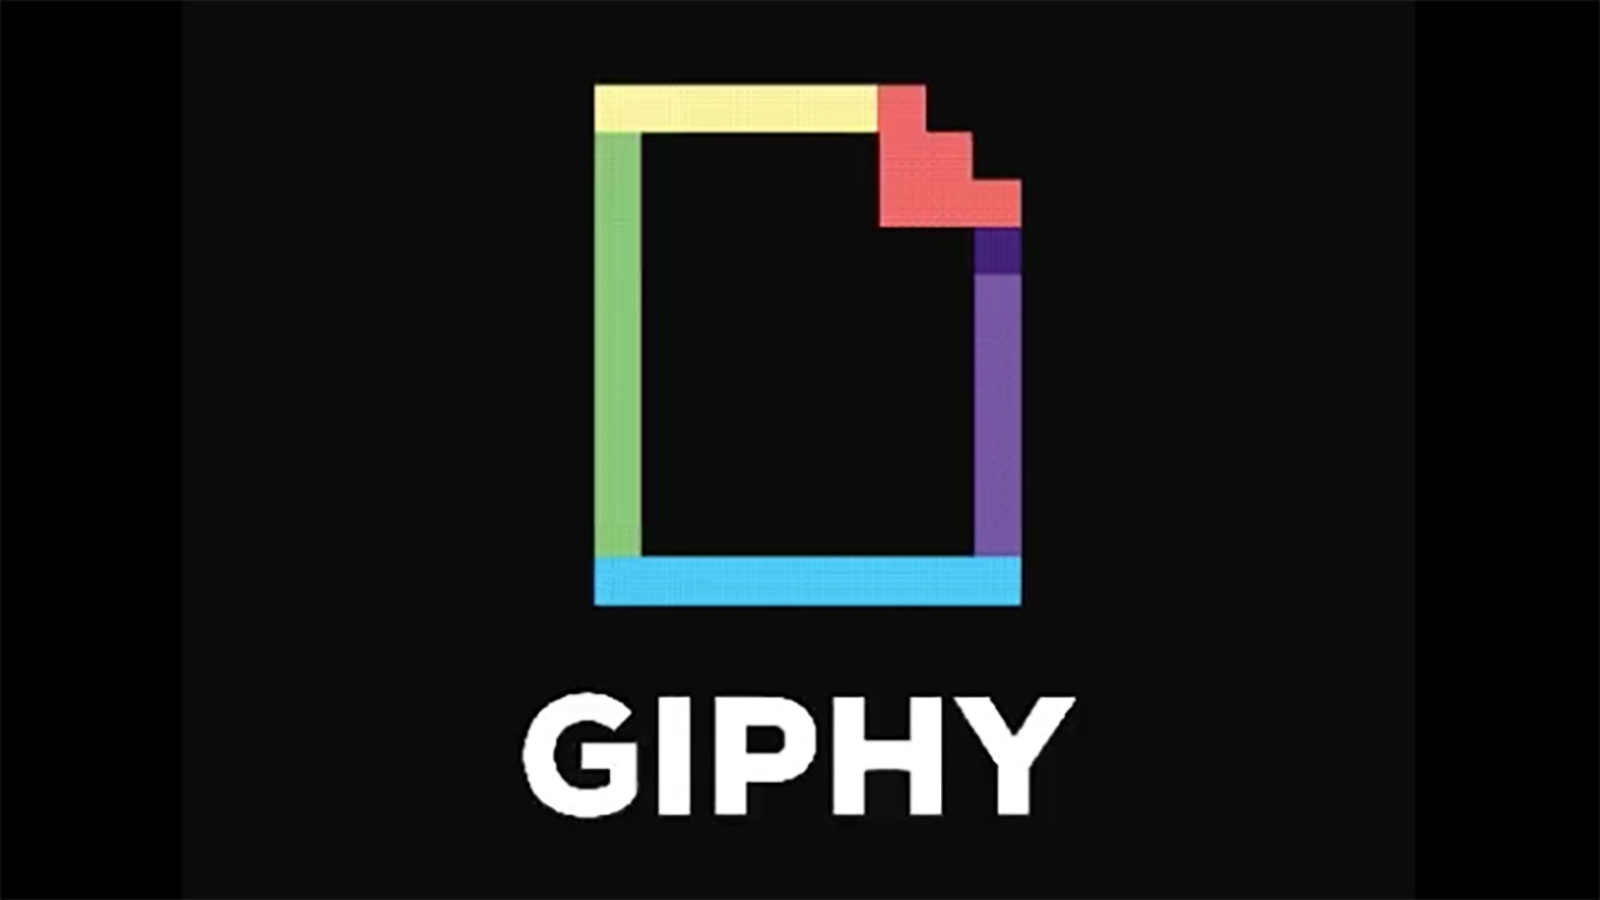 GIPHY Was Acquired By Facebook